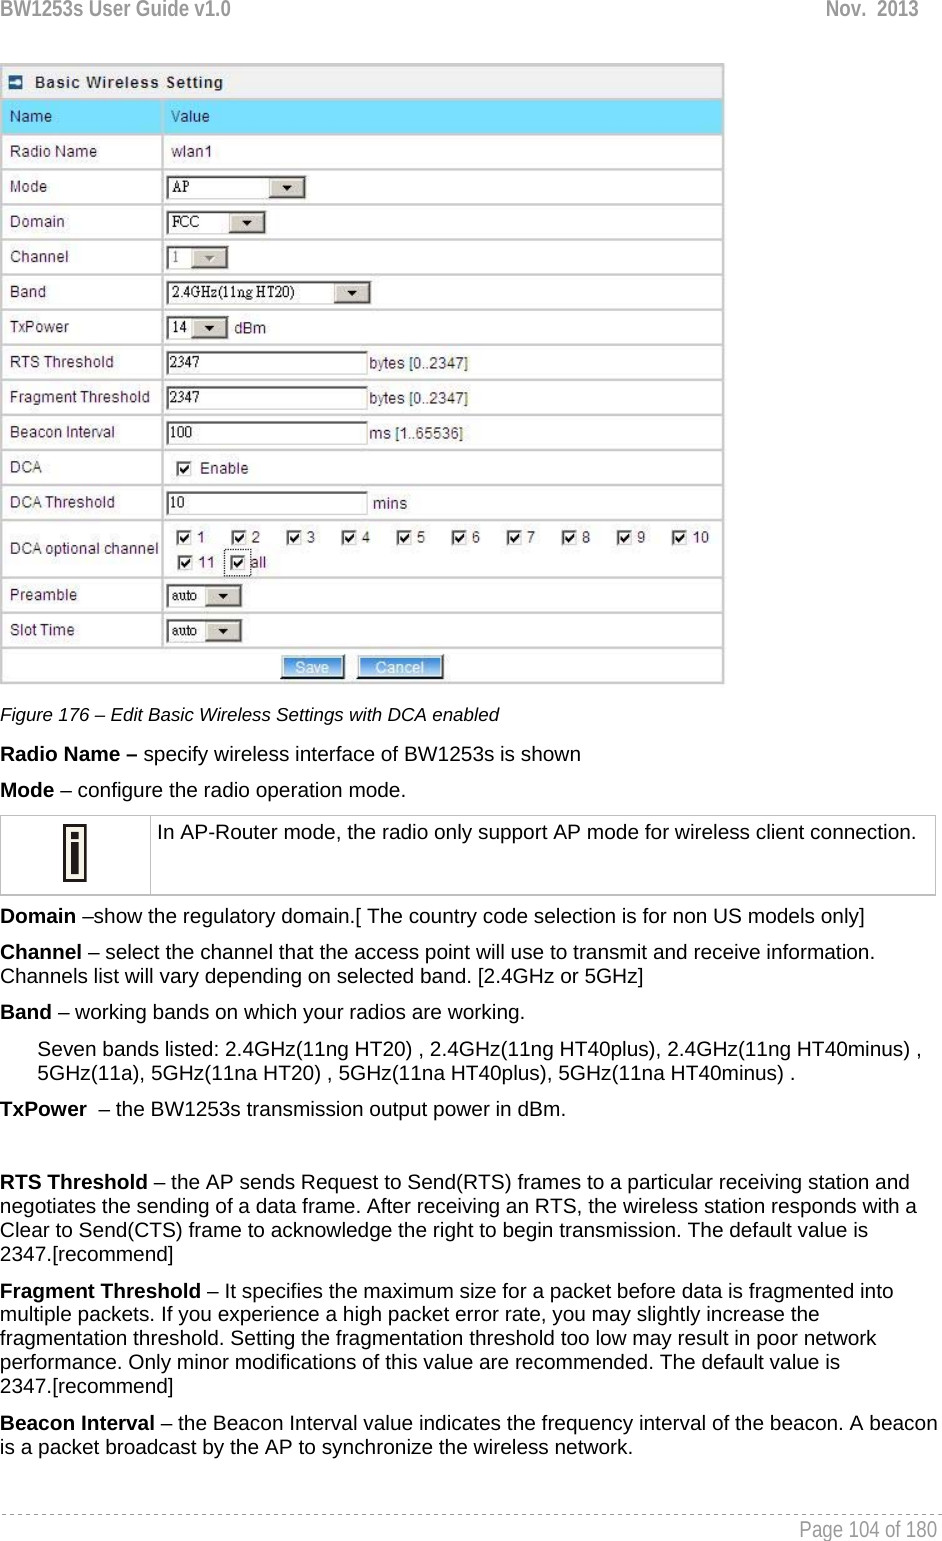 BW1253s User Guide v1.0  Nov.  2013     Page 104 of 180    Figure 176 – Edit Basic Wireless Settings with DCA enabled Radio Name – specify wireless interface of BW1253s is shown Mode – configure the radio operation mode.   In AP-Router mode, the radio only support AP mode for wireless client connection.Domain –show the regulatory domain.[ The country code selection is for non US models only] Channel – select the channel that the access point will use to transmit and receive information. Channels list will vary depending on selected band. [2.4GHz or 5GHz] Band – working bands on which your radios are working.  Seven bands listed: 2.4GHz(11ng HT20) , 2.4GHz(11ng HT40plus), 2.4GHz(11ng HT40minus) , 5GHz(11a), 5GHz(11na HT20) , 5GHz(11na HT40plus), 5GHz(11na HT40minus) . TxPower  – the BW1253s transmission output power in dBm.   RTS Threshold – the AP sends Request to Send(RTS) frames to a particular receiving station and negotiates the sending of a data frame. After receiving an RTS, the wireless station responds with a Clear to Send(CTS) frame to acknowledge the right to begin transmission. The default value is 2347.[recommend] Fragment Threshold – It specifies the maximum size for a packet before data is fragmented into multiple packets. If you experience a high packet error rate, you may slightly increase the fragmentation threshold. Setting the fragmentation threshold too low may result in poor network performance. Only minor modifications of this value are recommended. The default value is 2347.[recommend] Beacon Interval – the Beacon Interval value indicates the frequency interval of the beacon. A beacon is a packet broadcast by the AP to synchronize the wireless network. 